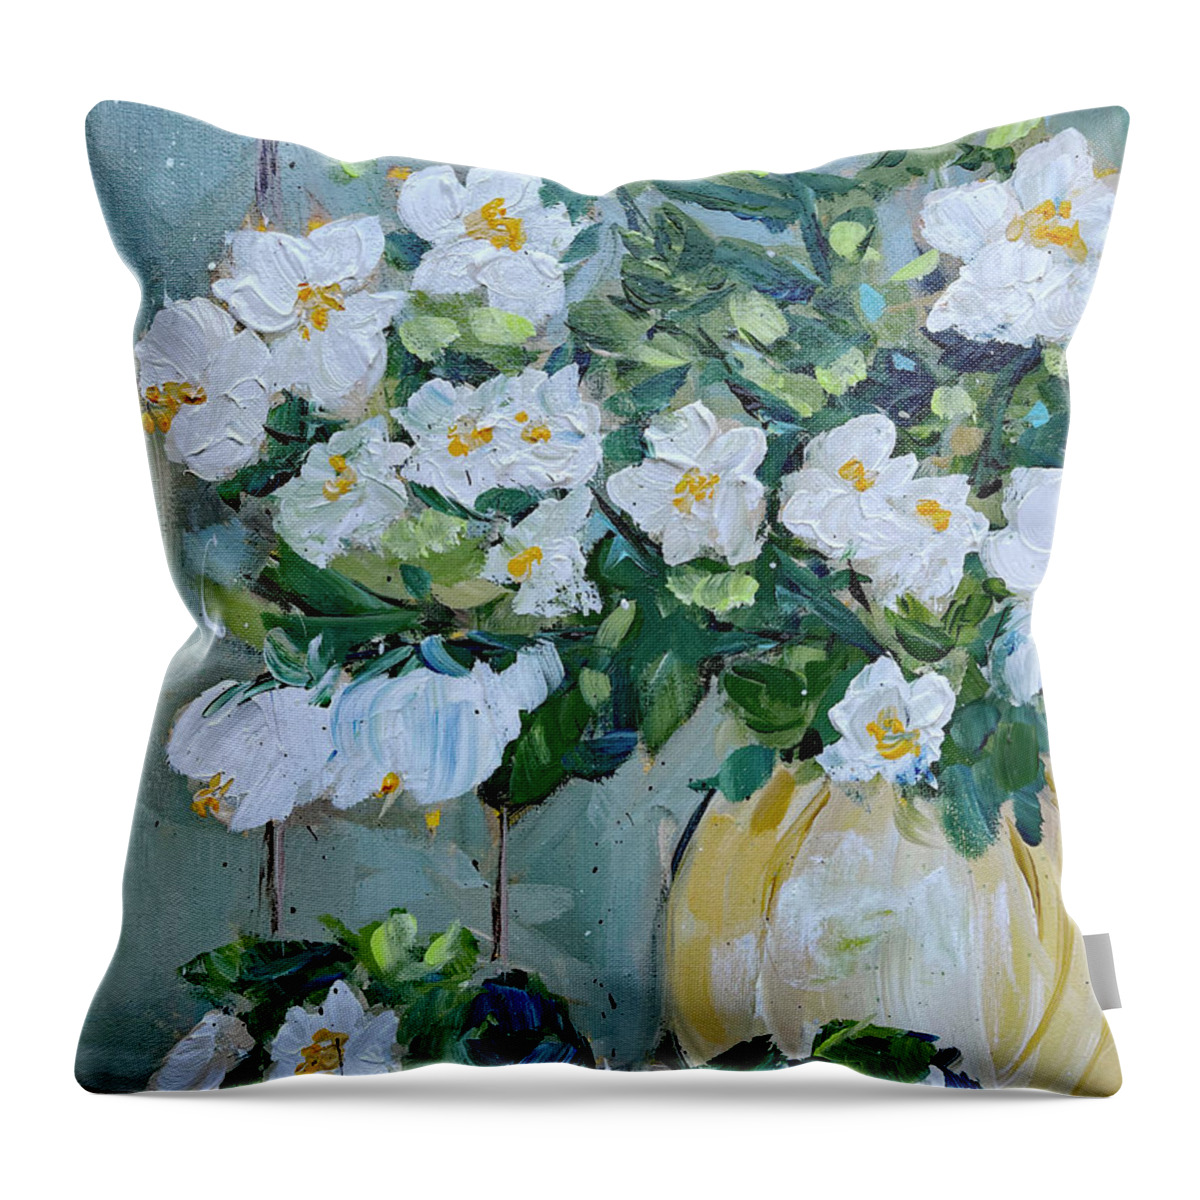 Jasmine Throw Pillow featuring the painting Jasmine by Roxy Rich